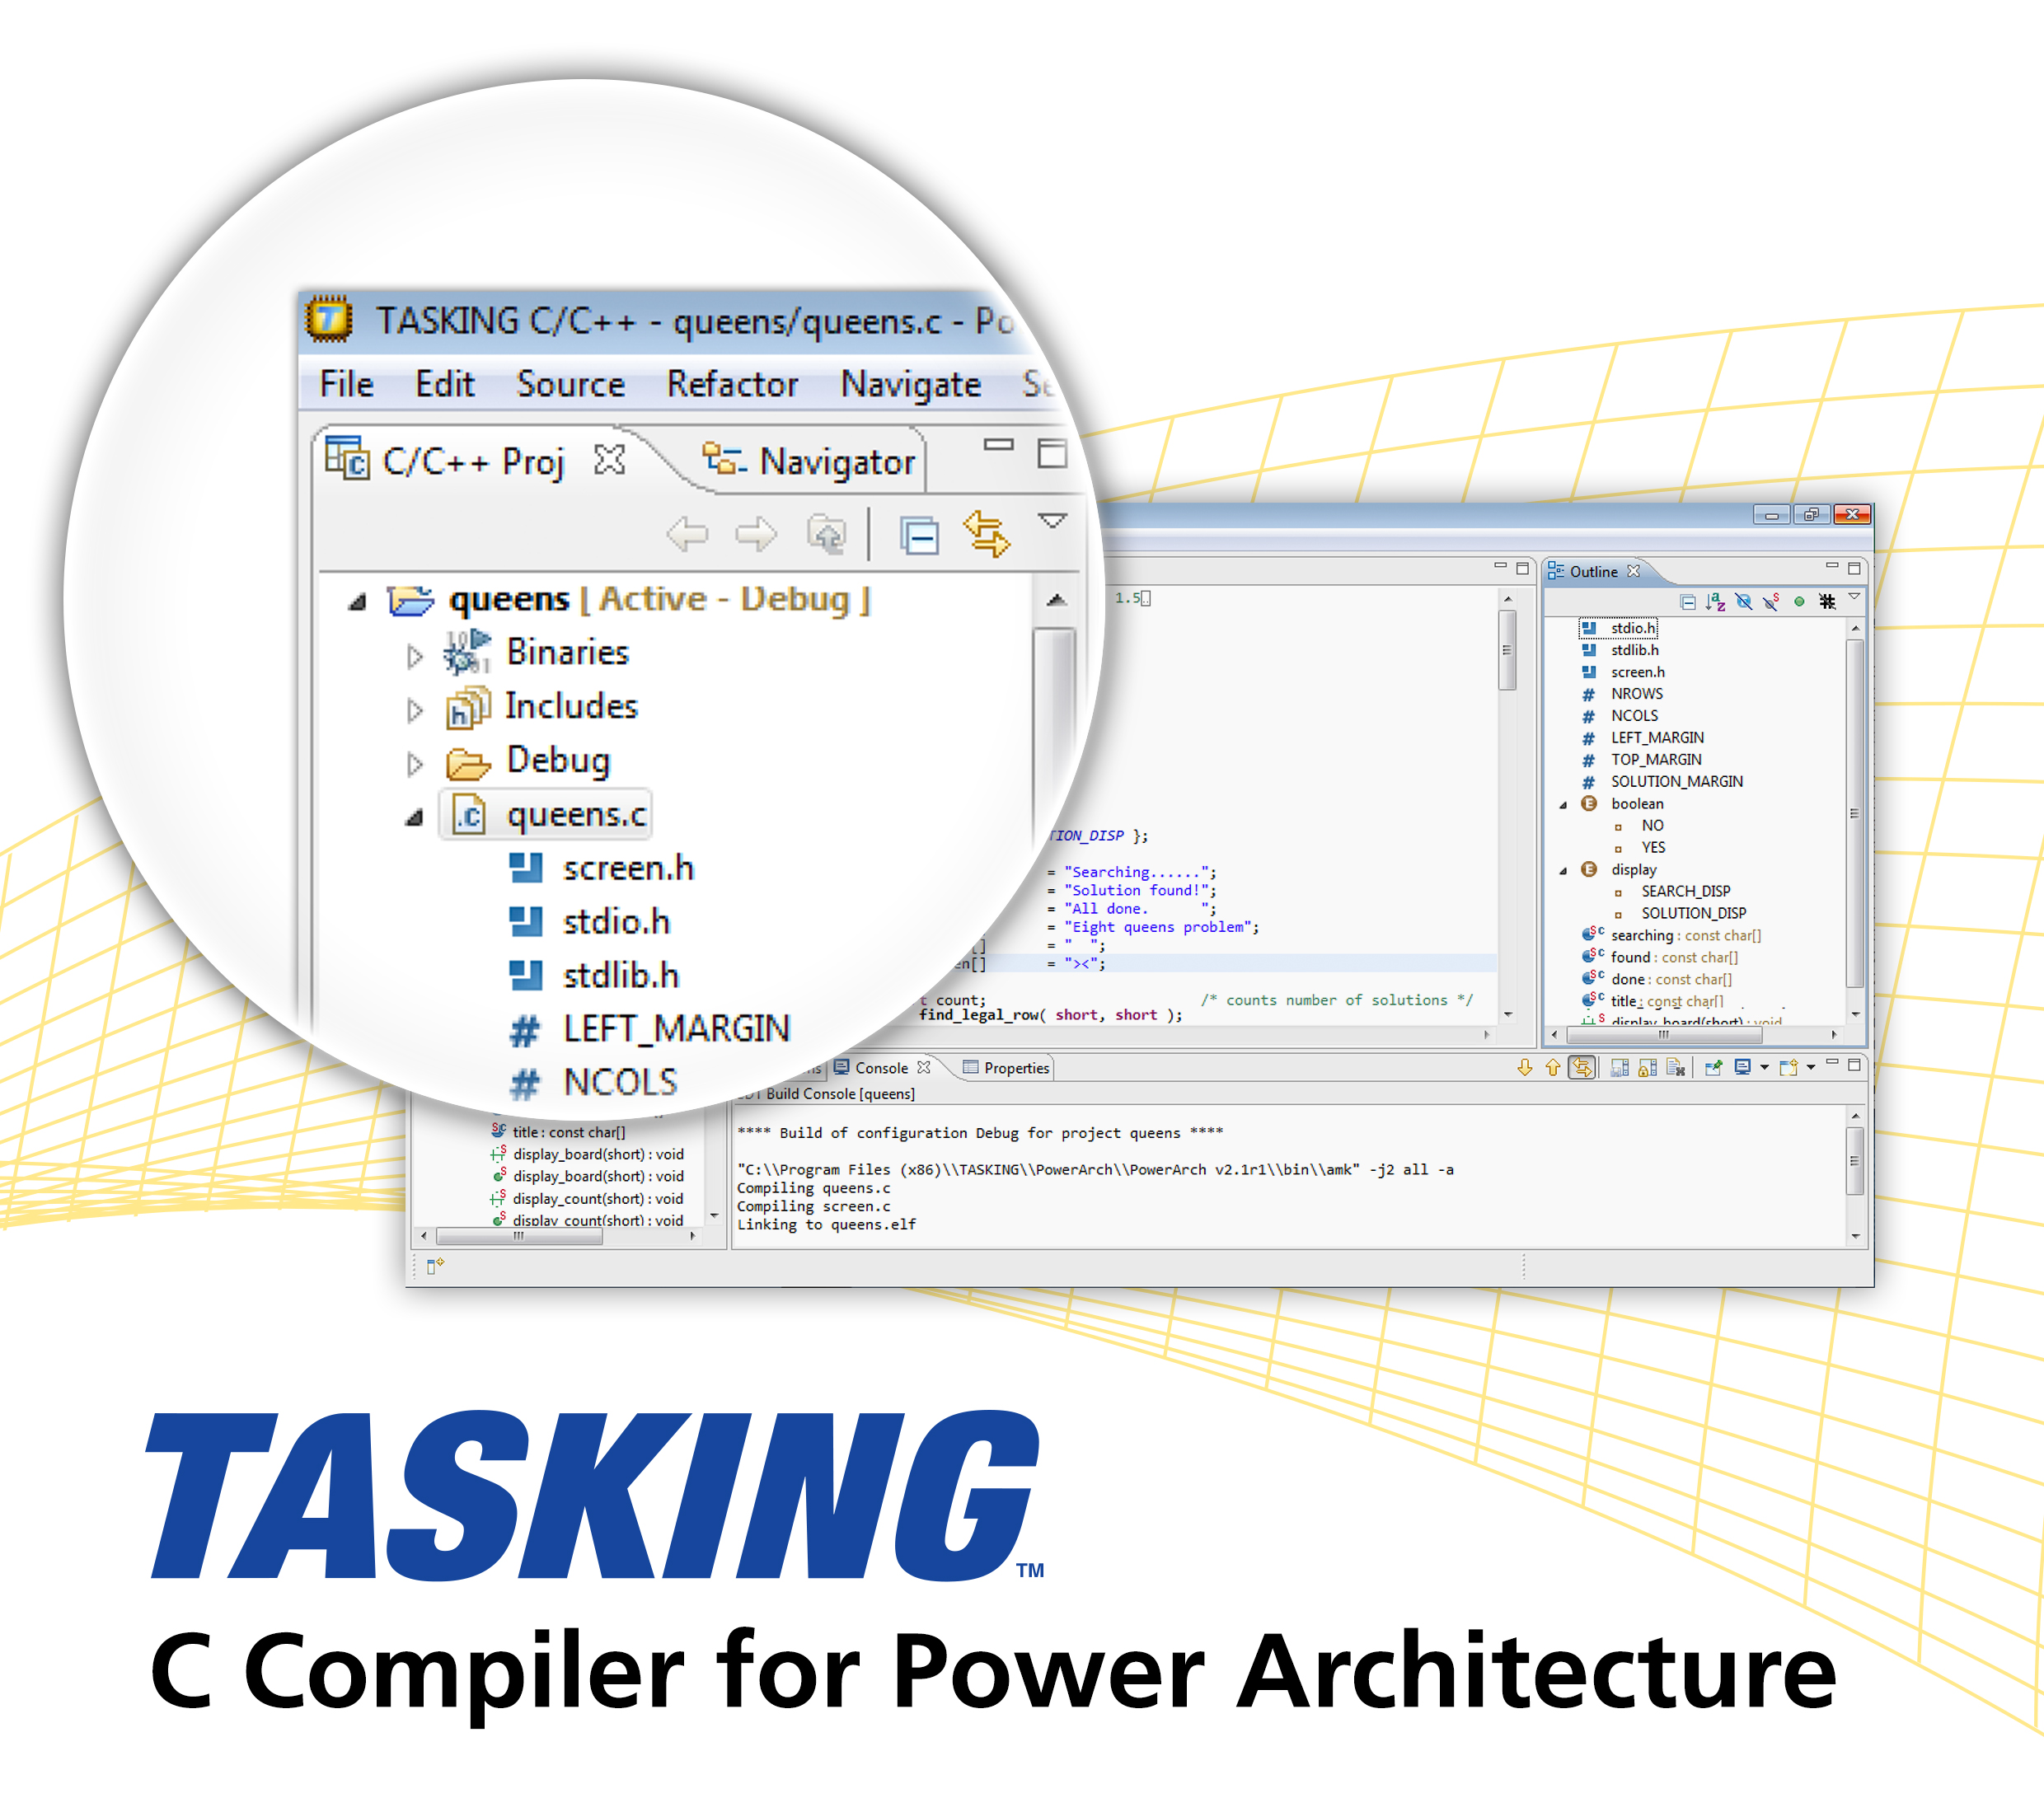 TASKING C compiler for Power Architecture 01